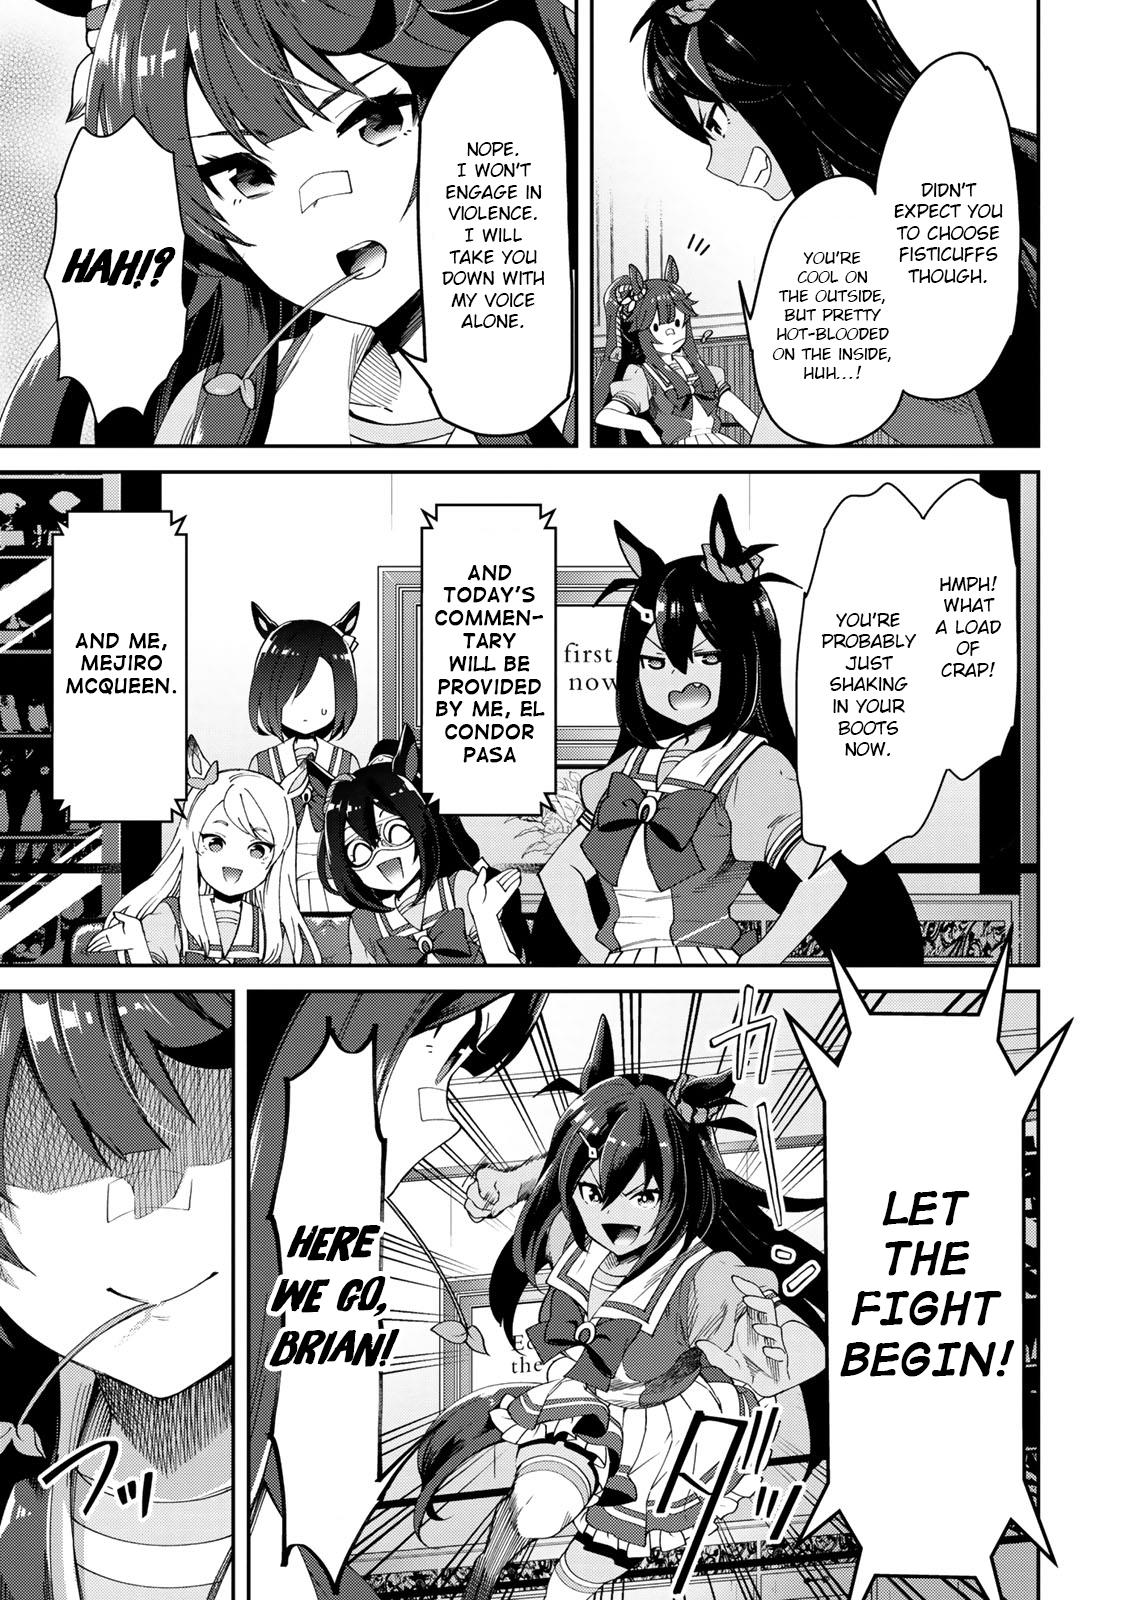 Starting Gate! Uma Musume Pretty Derby Vol.4 Chapter 26.5: Hishi Amazon Special - Picture 3